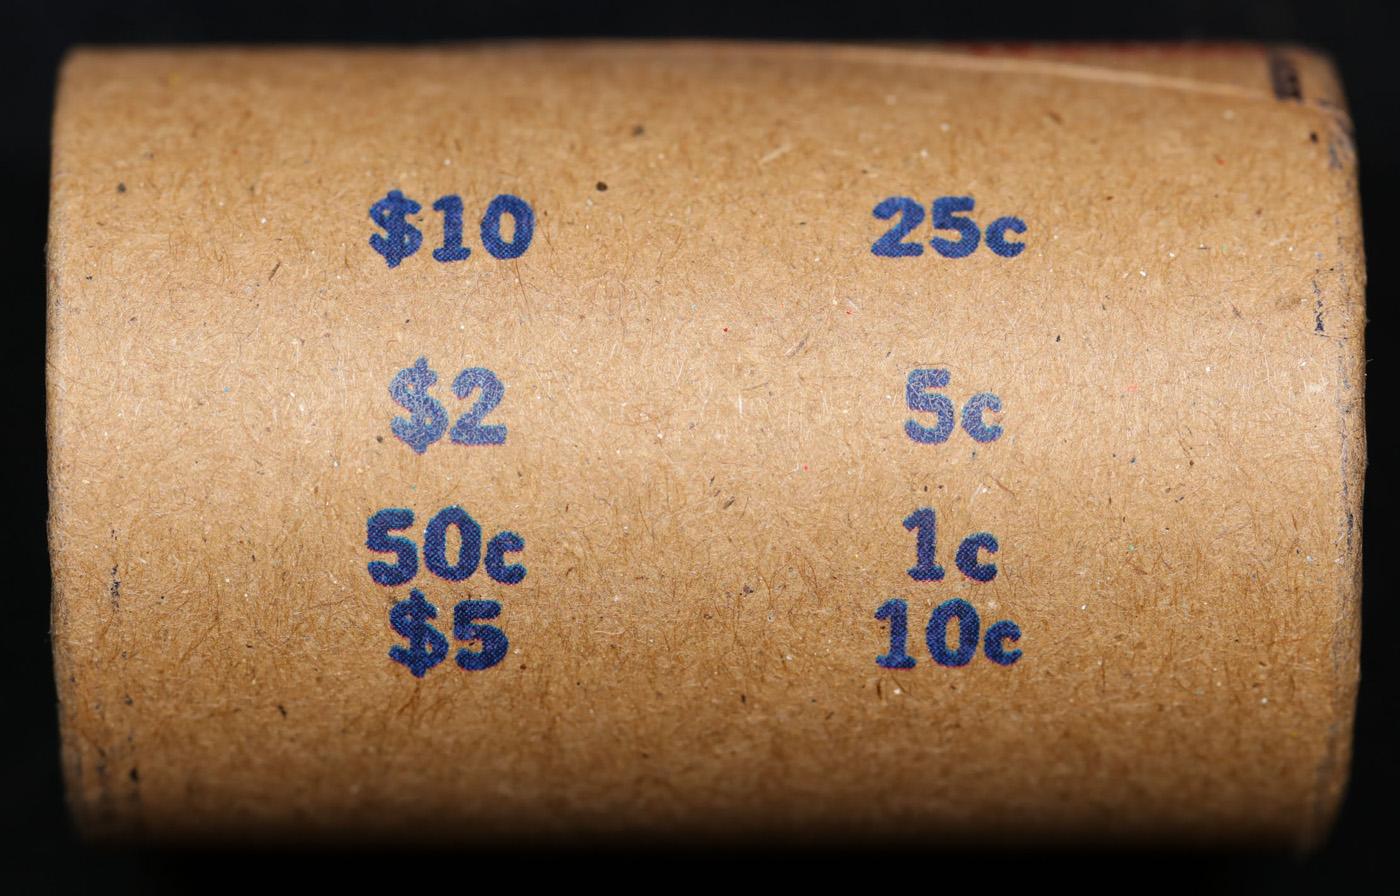 High Value! - Covered End Roll - Marked "Unc Peace Reserve" - Weight shows x20 Coins (FC)